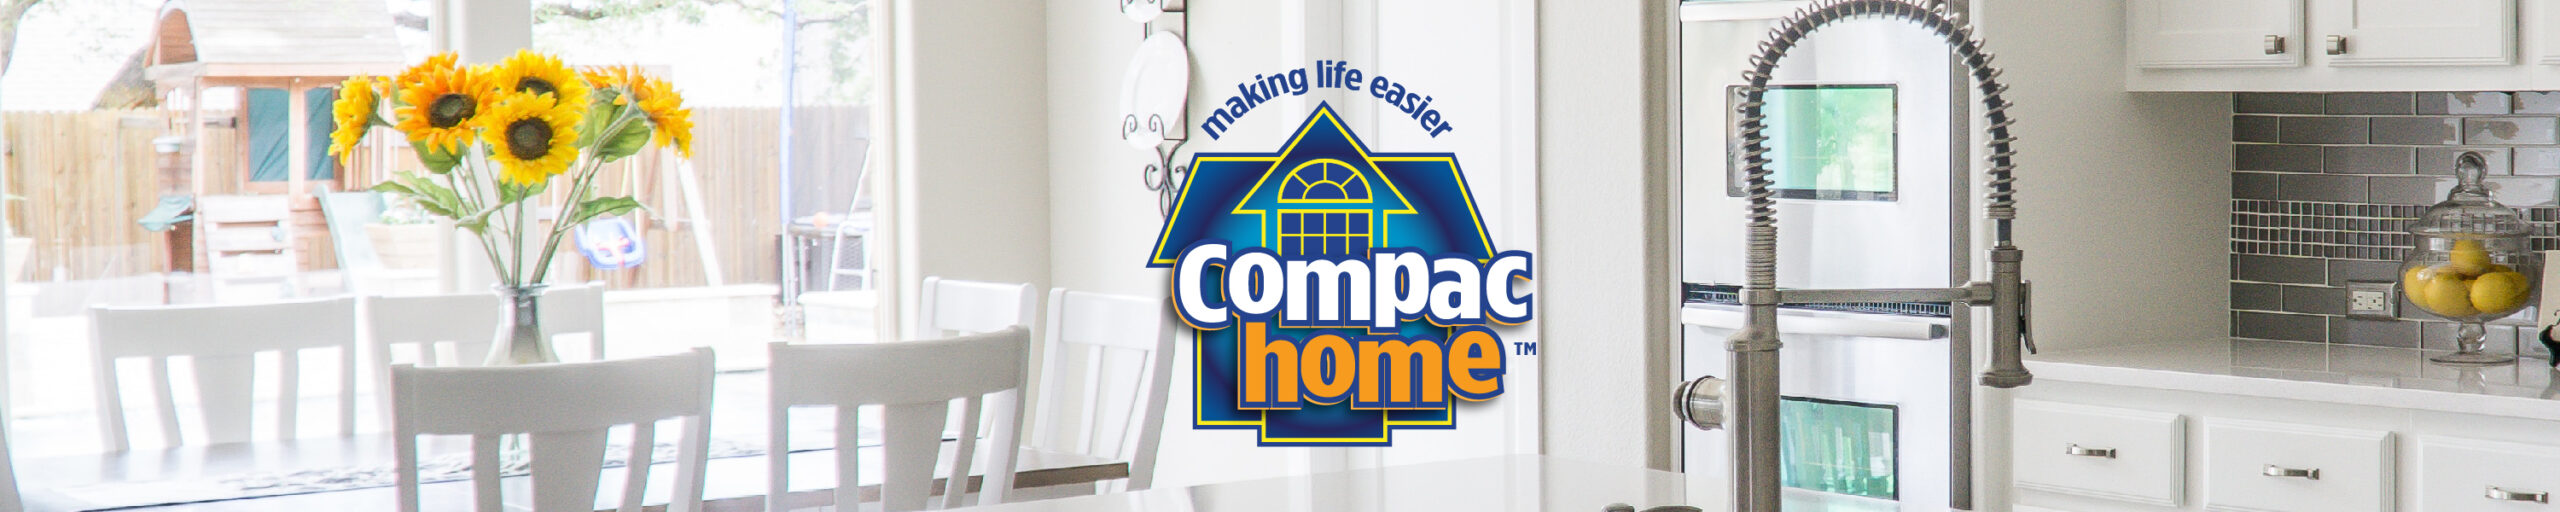 Compac Home black-owned